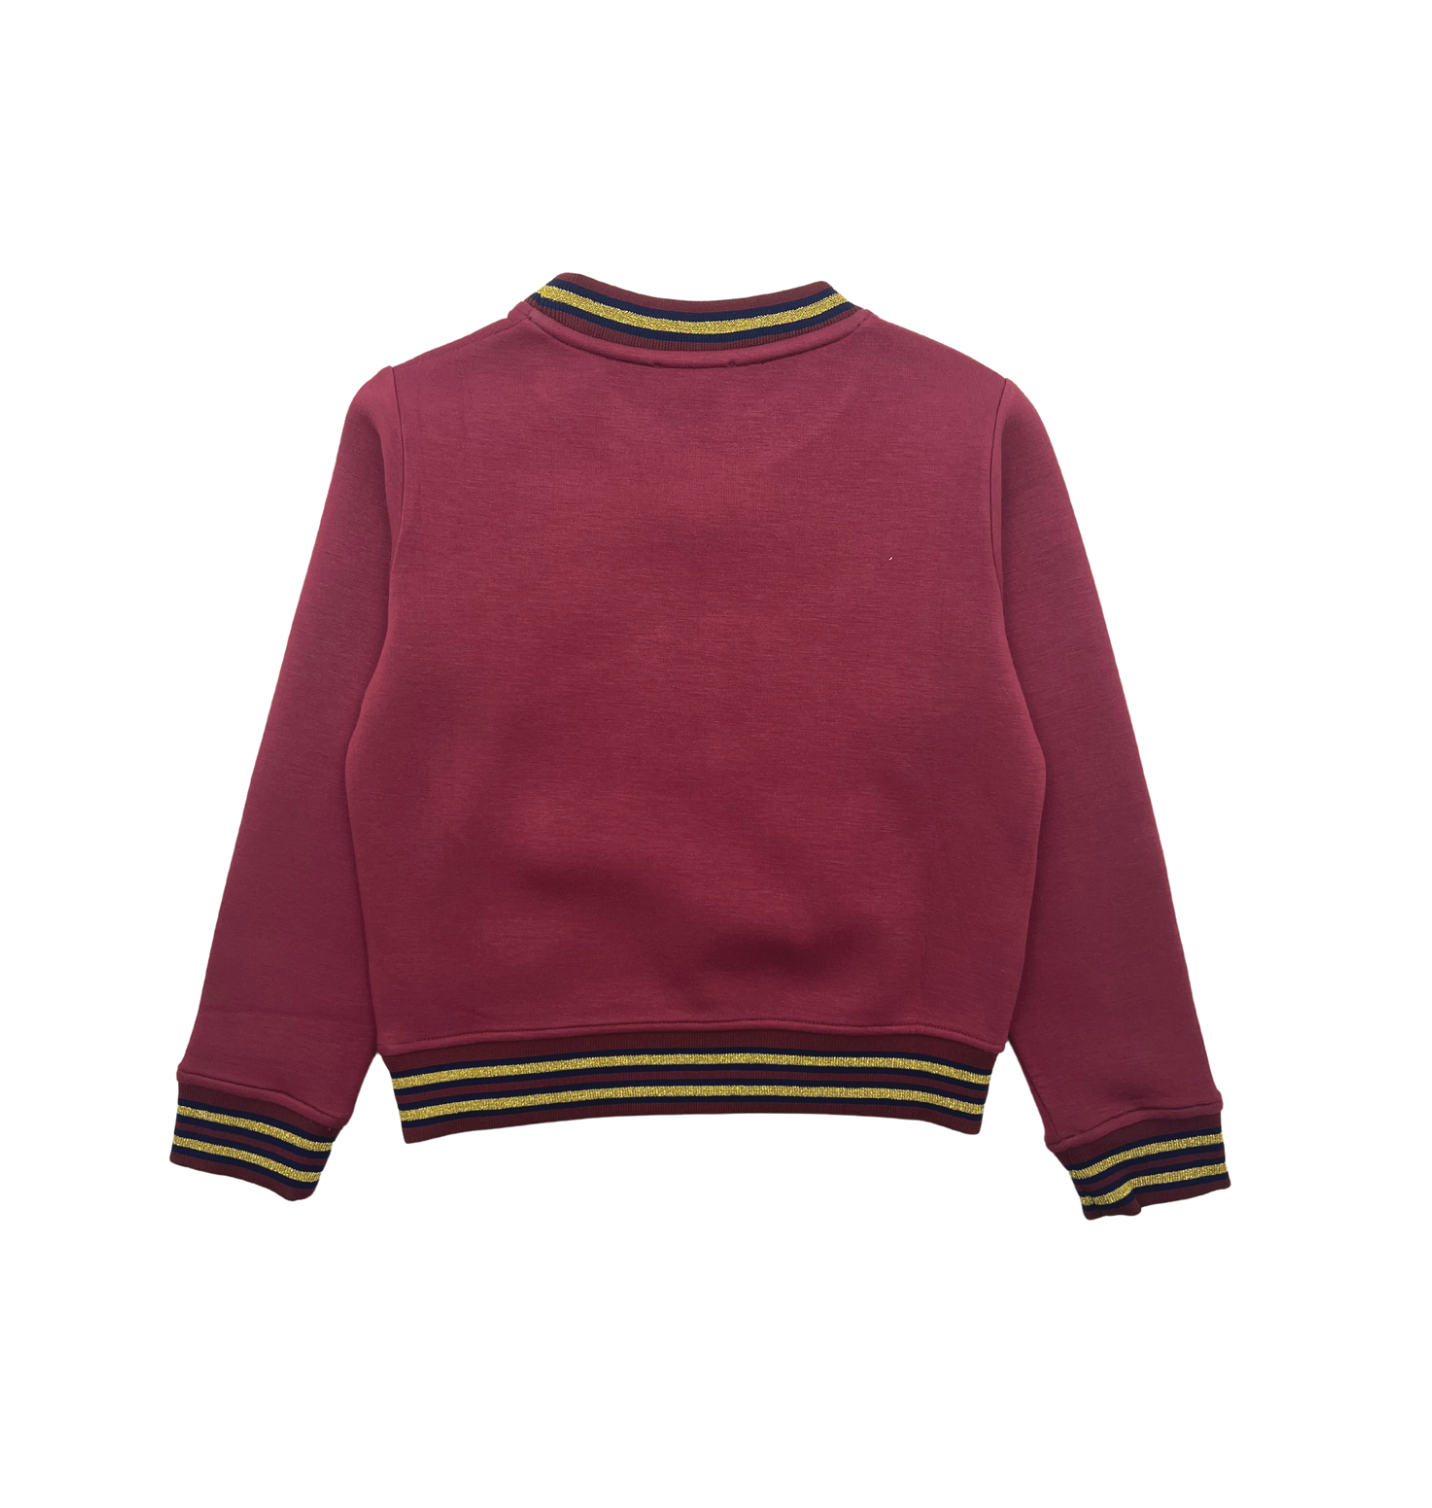 PINKO - Ultra soft burgundy sweatshirt with sign inserts - 8 years old